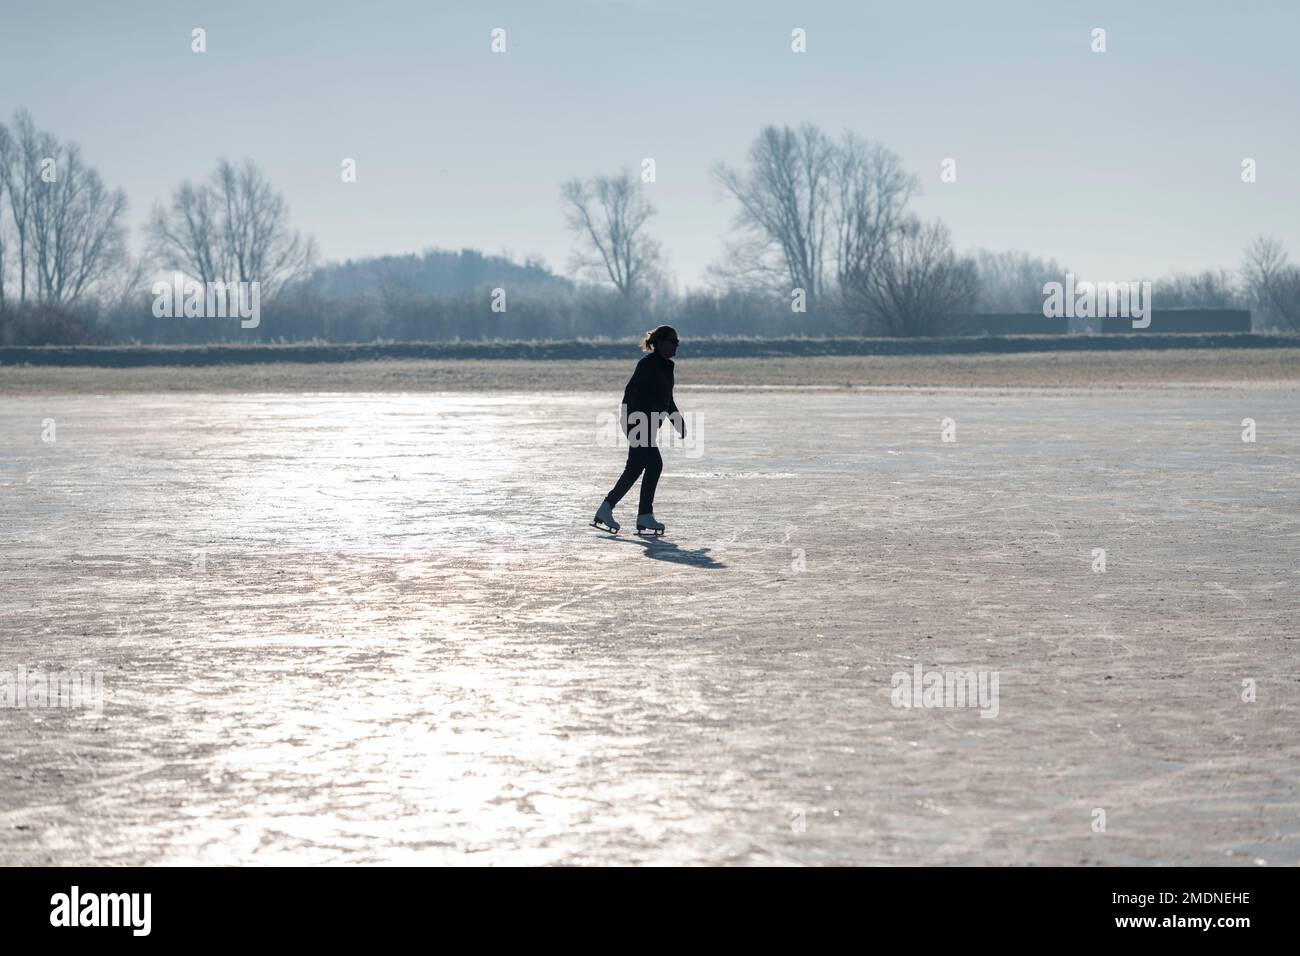 Bluntisham, Cambridgeshire, UK. 23rd Jan, 2023. People enjoy the cold snap with some fen skating in sunshine as the cold winter weather continues. Ice skating in the fens is a popular pastime as the shallow flooded flat fields can freeze to allow safe skating. This is the first winter for about 10 years when sharp overnight frosts have lasted long enough to allow the water to freeze. Credit: Julian Eales/Alamy Live News Stock Photo